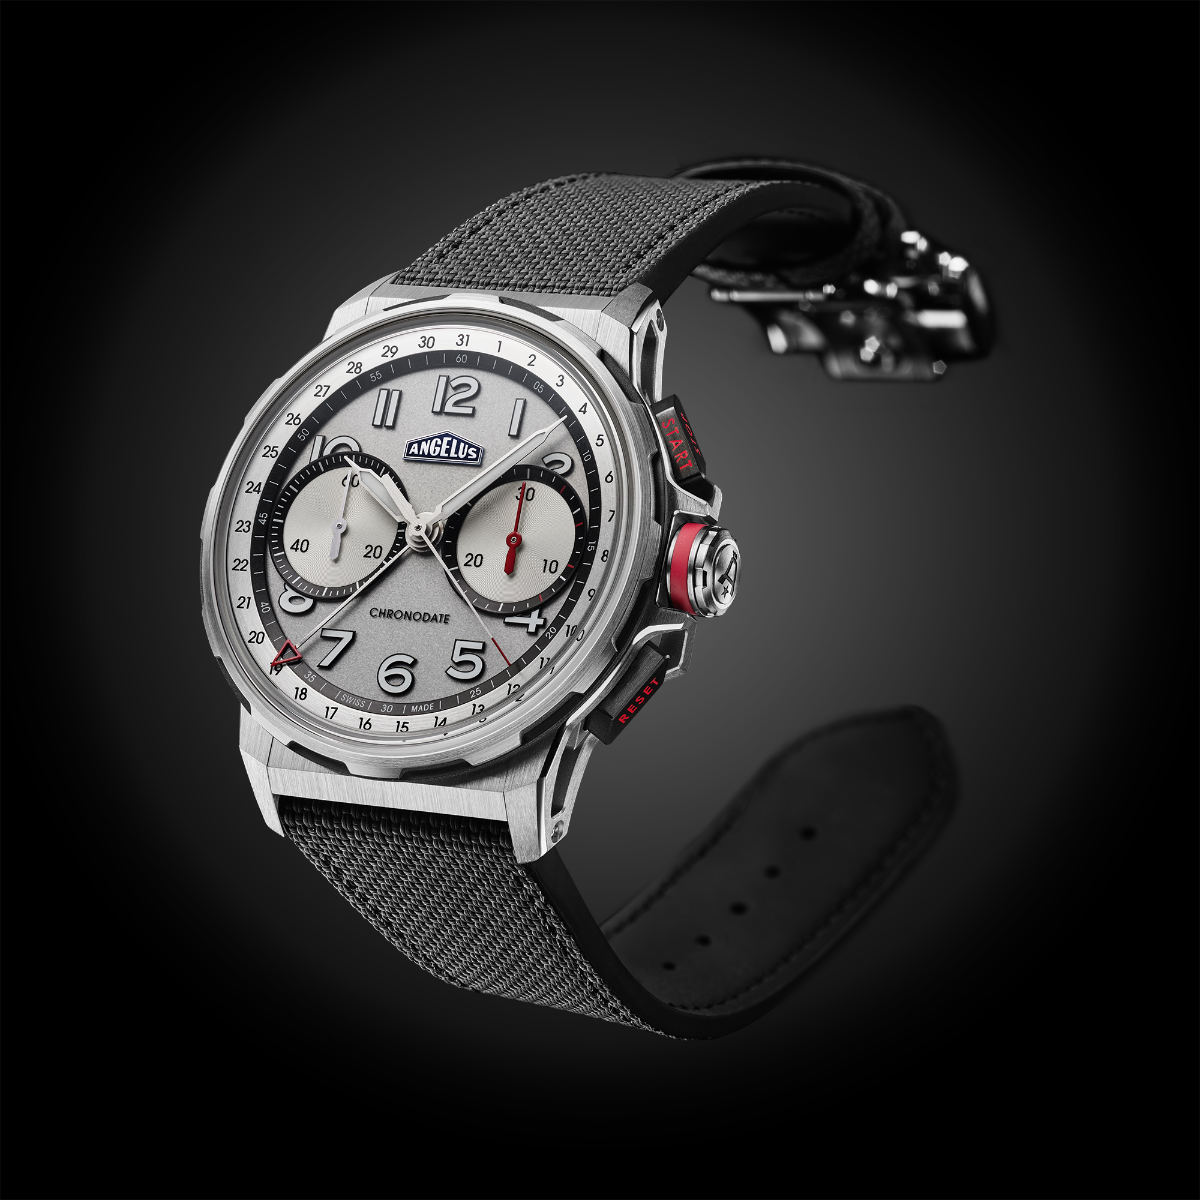 Angelus Launches Its New Chronodate Watch Collection: The Evolution Of An Icon